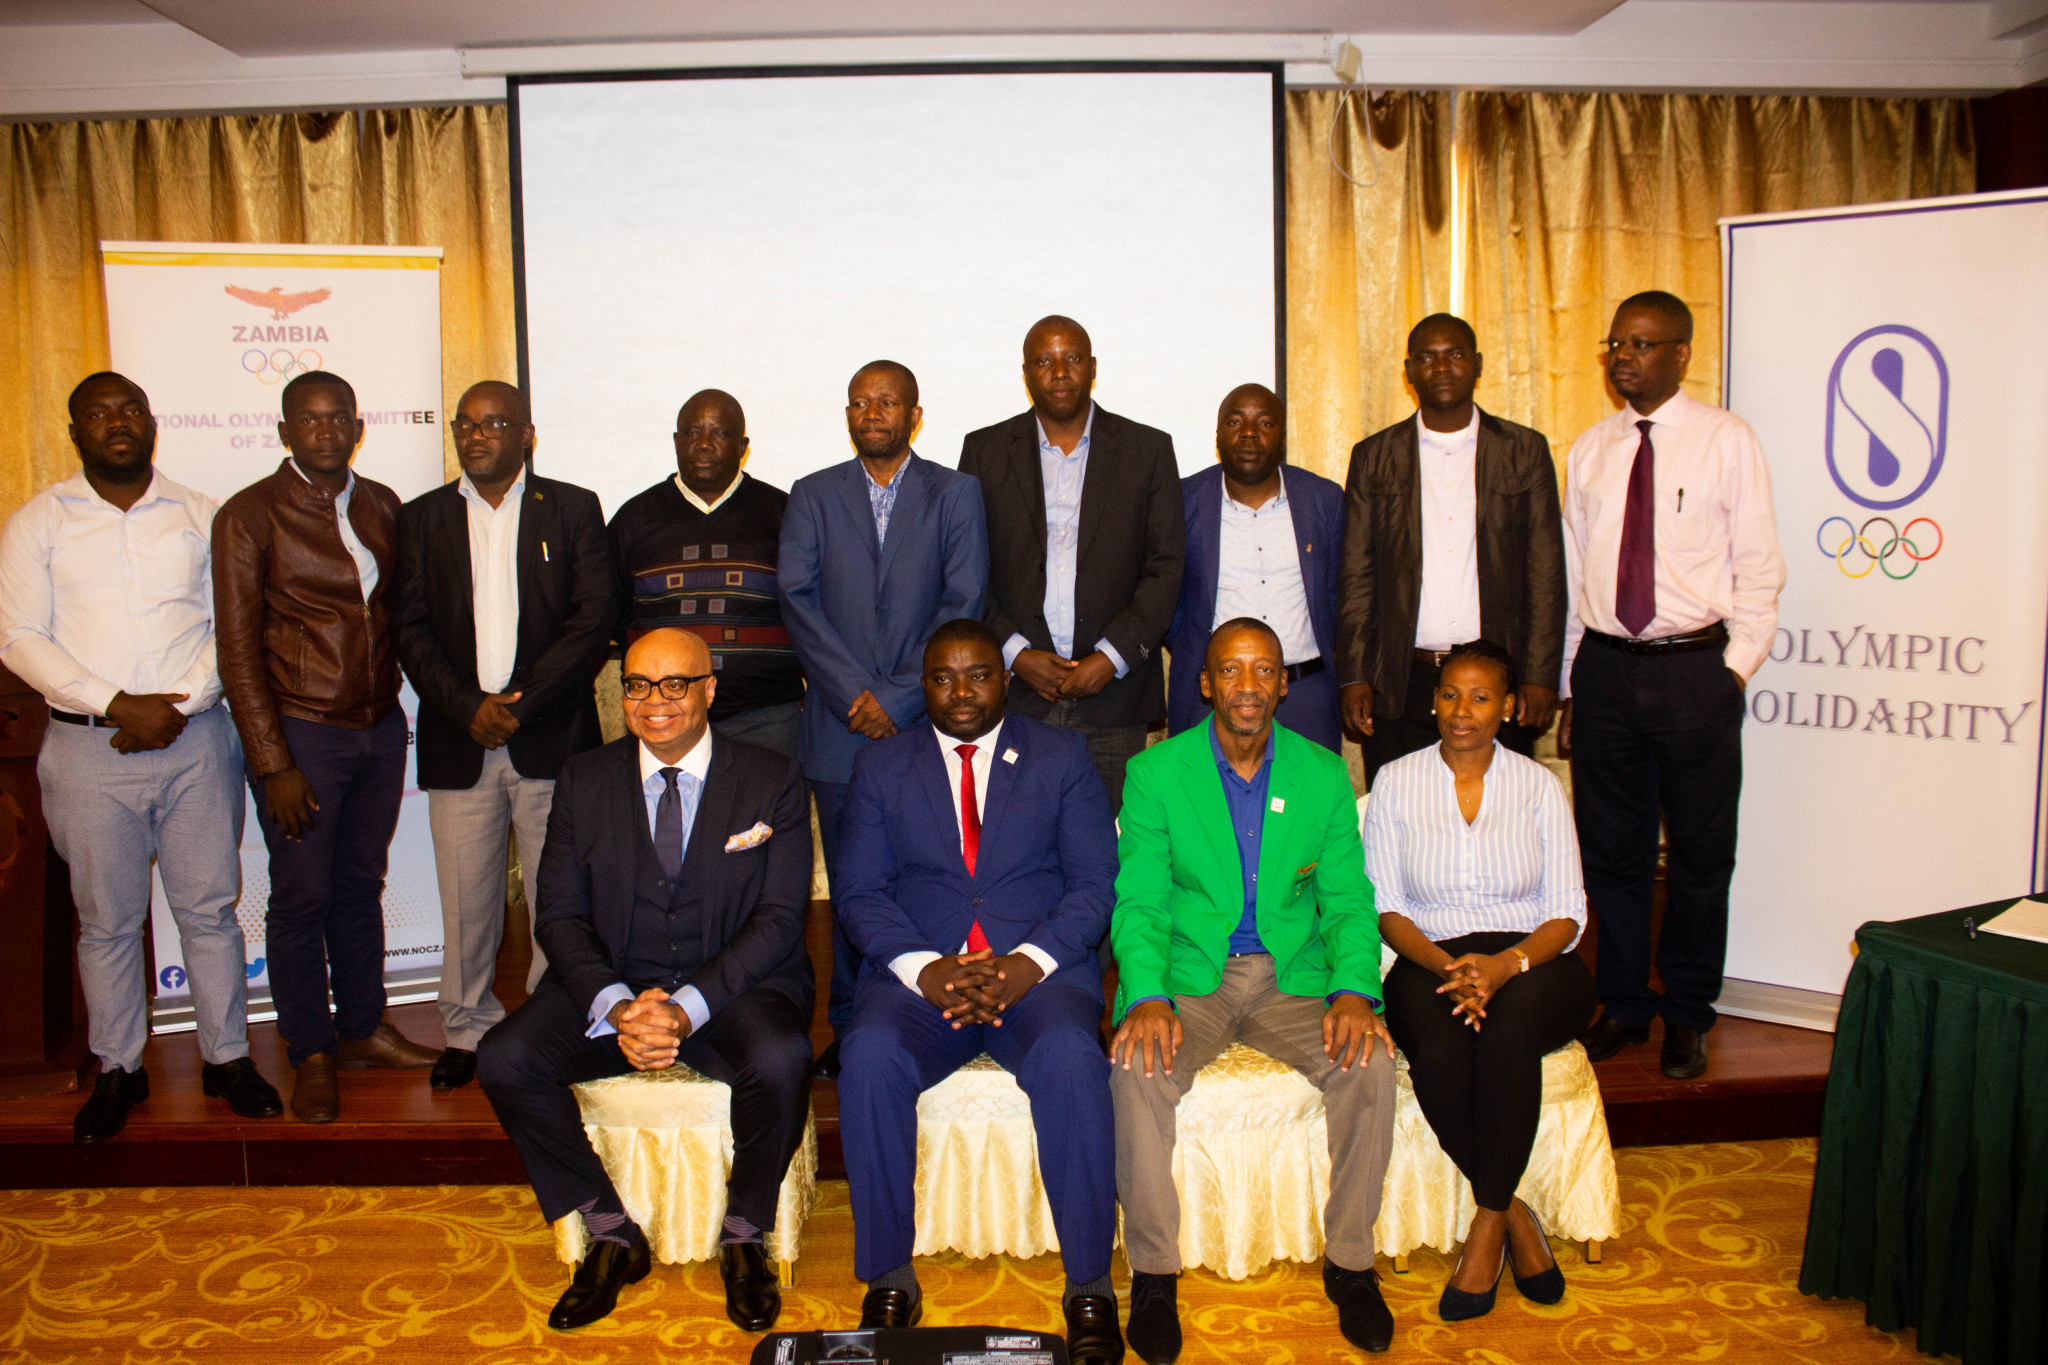 National Olympic Committee of Zambia holds marketing workshop